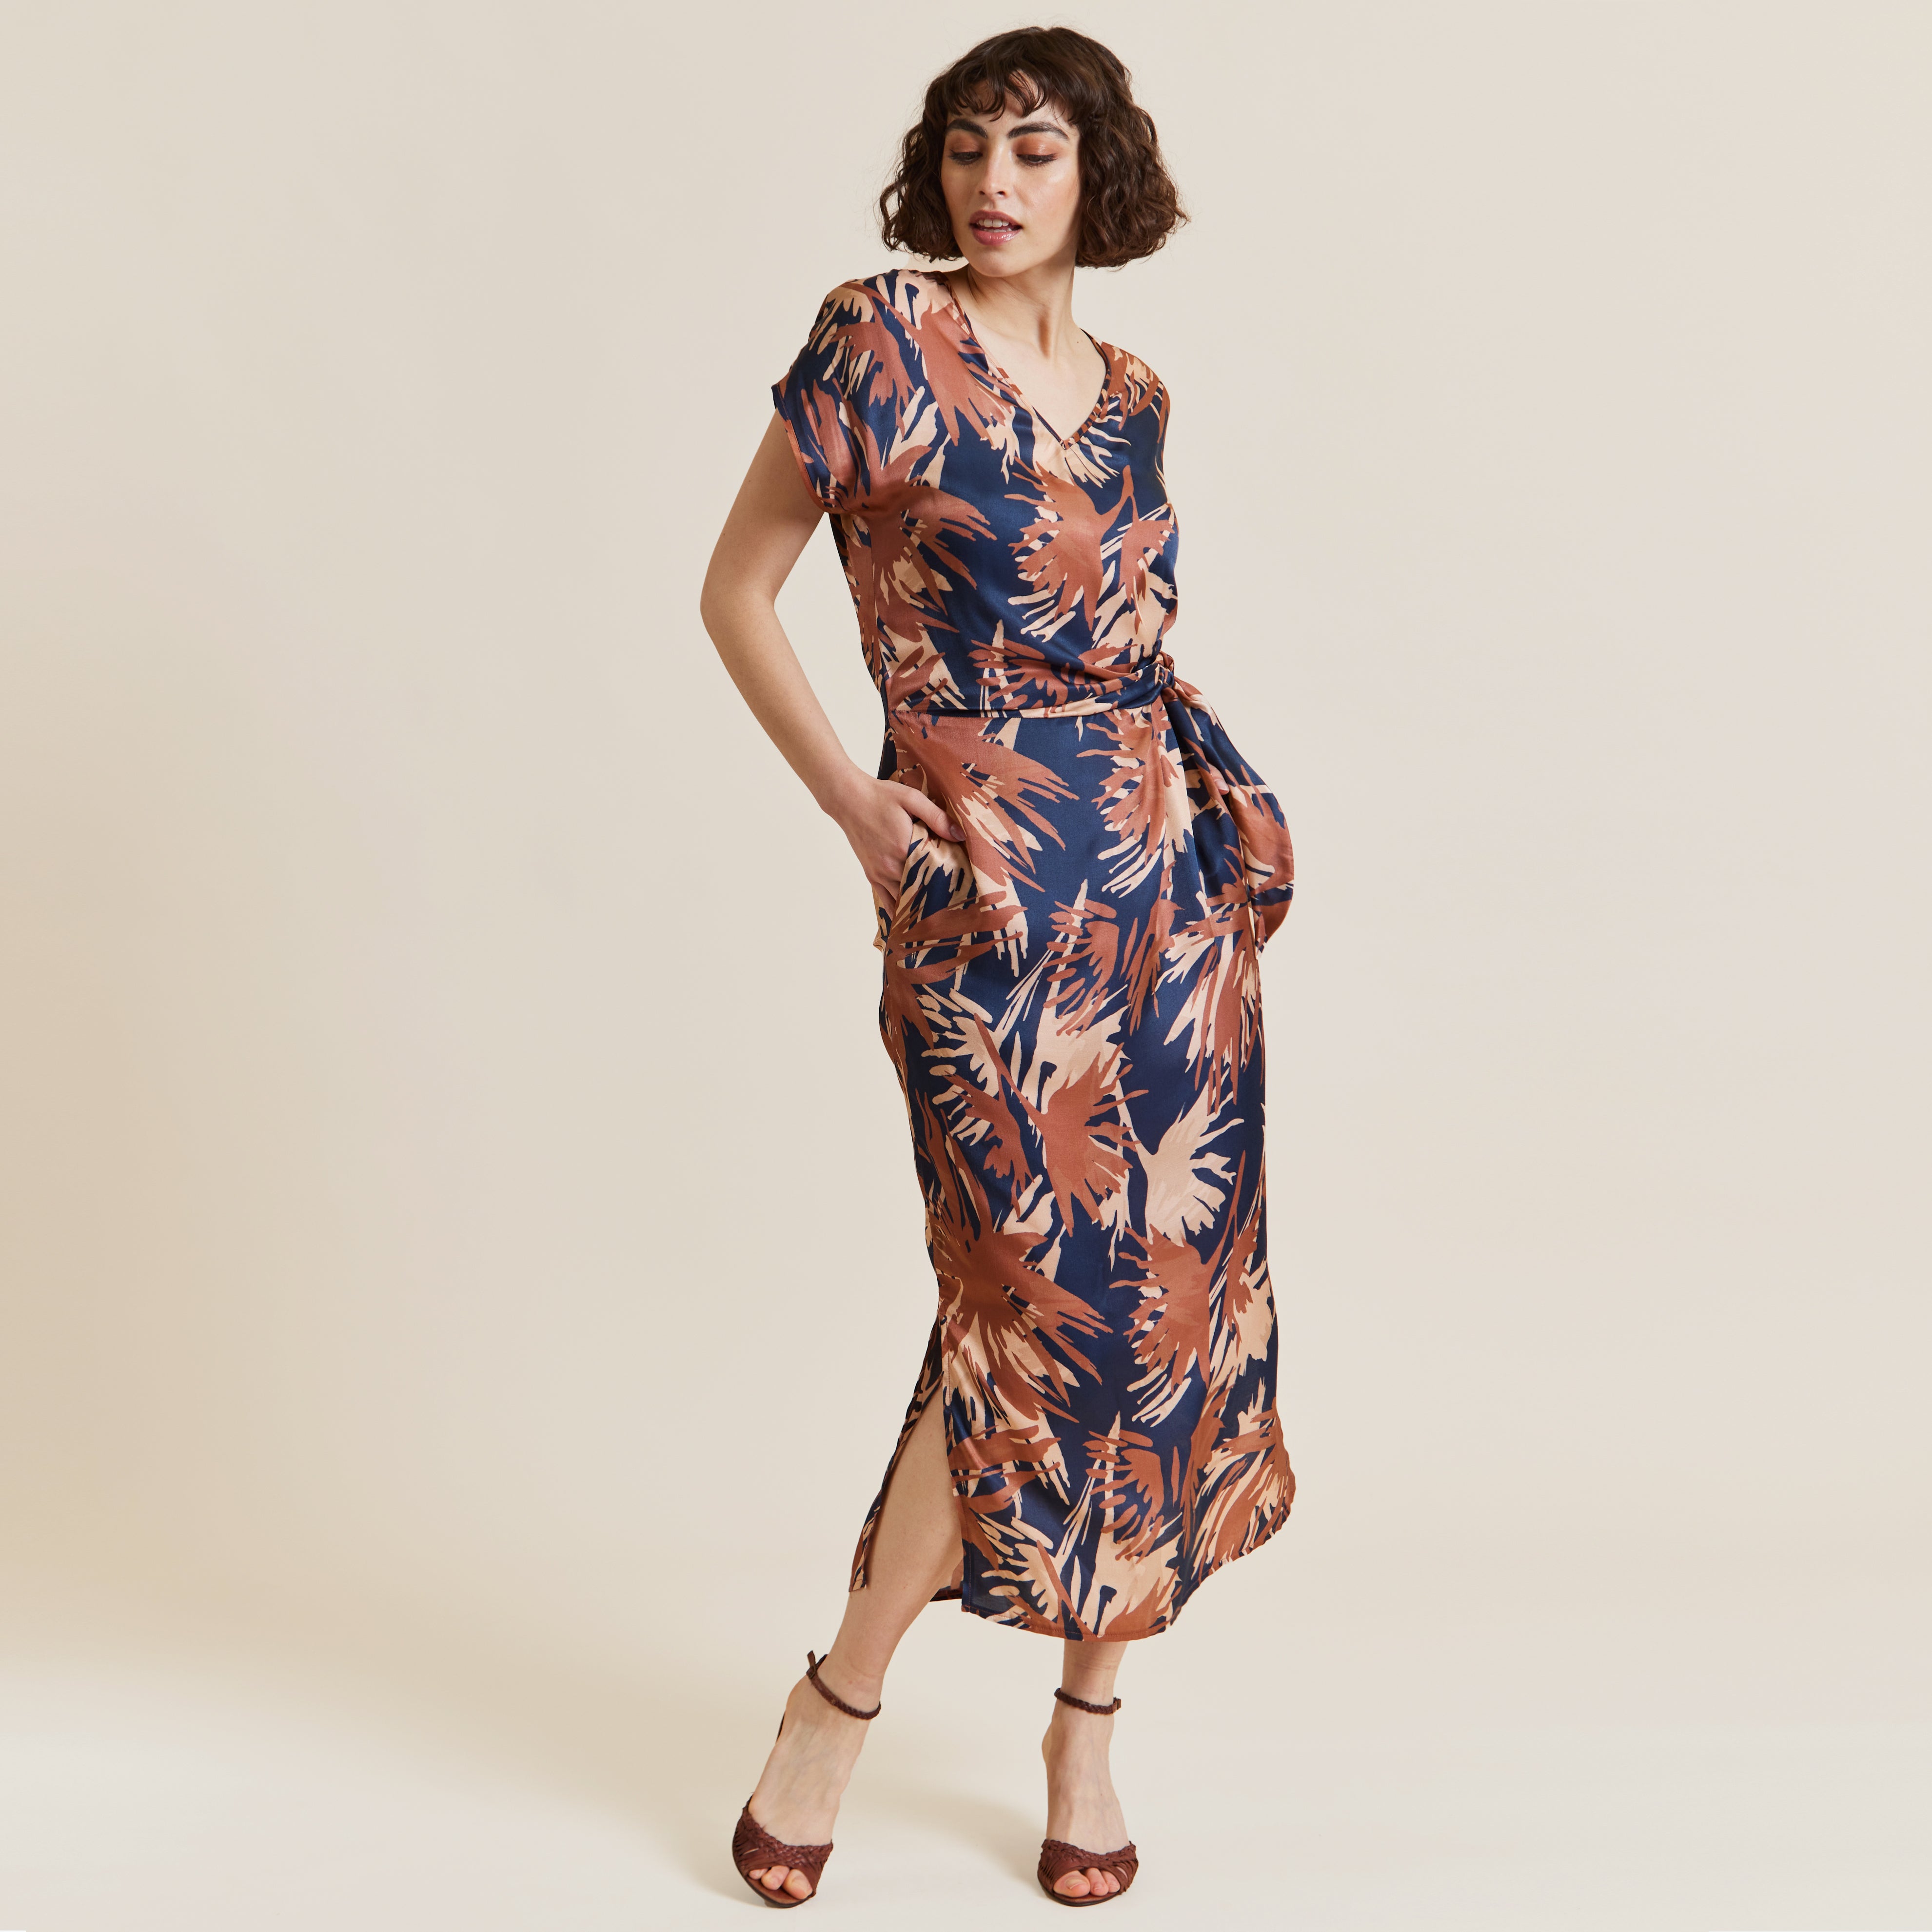 Hoi Polloi Navy, Terracotta and Nude Printed Silk Viscose Tie Dress by Me&Thee